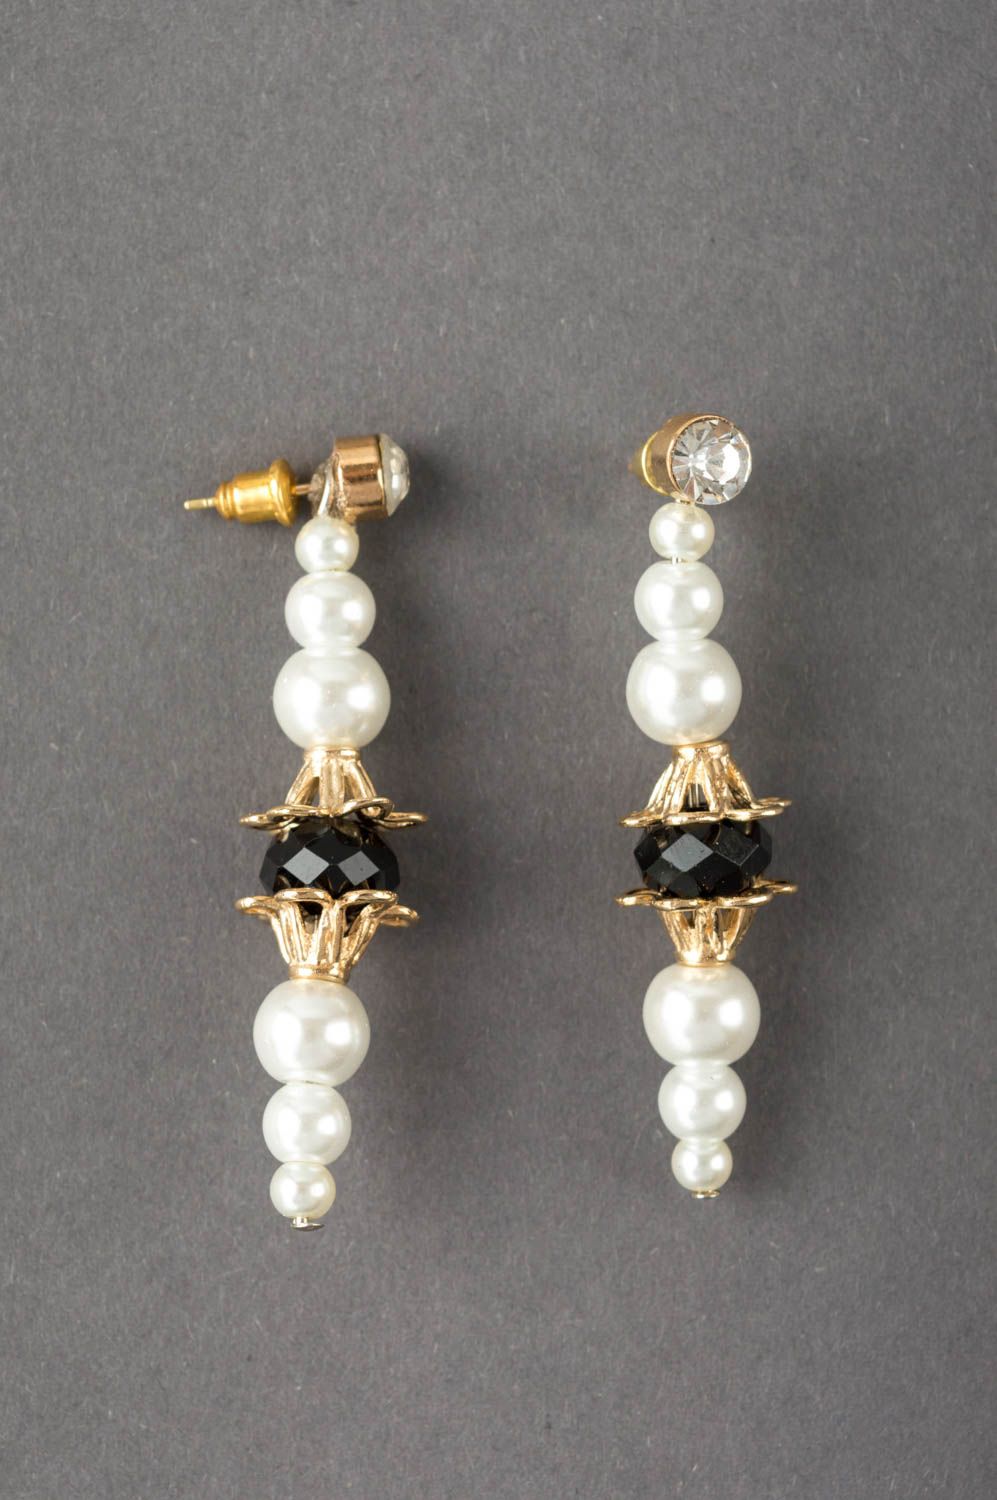 Handmade stud earrings with charms cute jewelry made of artificial pearls photo 2